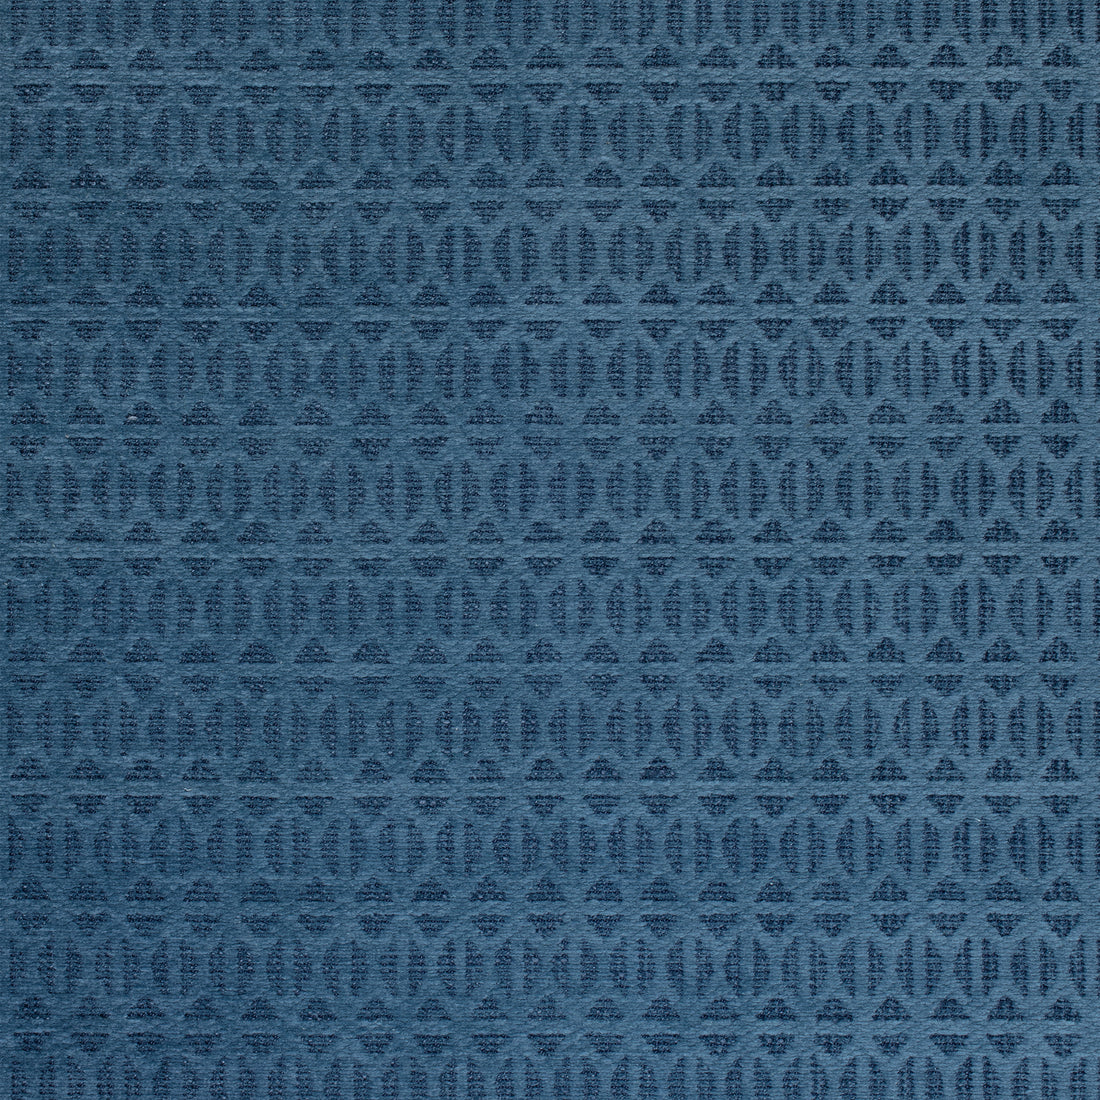 Quinlan fabric in navy color - pattern number W789104 - by Thibaut in the Reverie collection